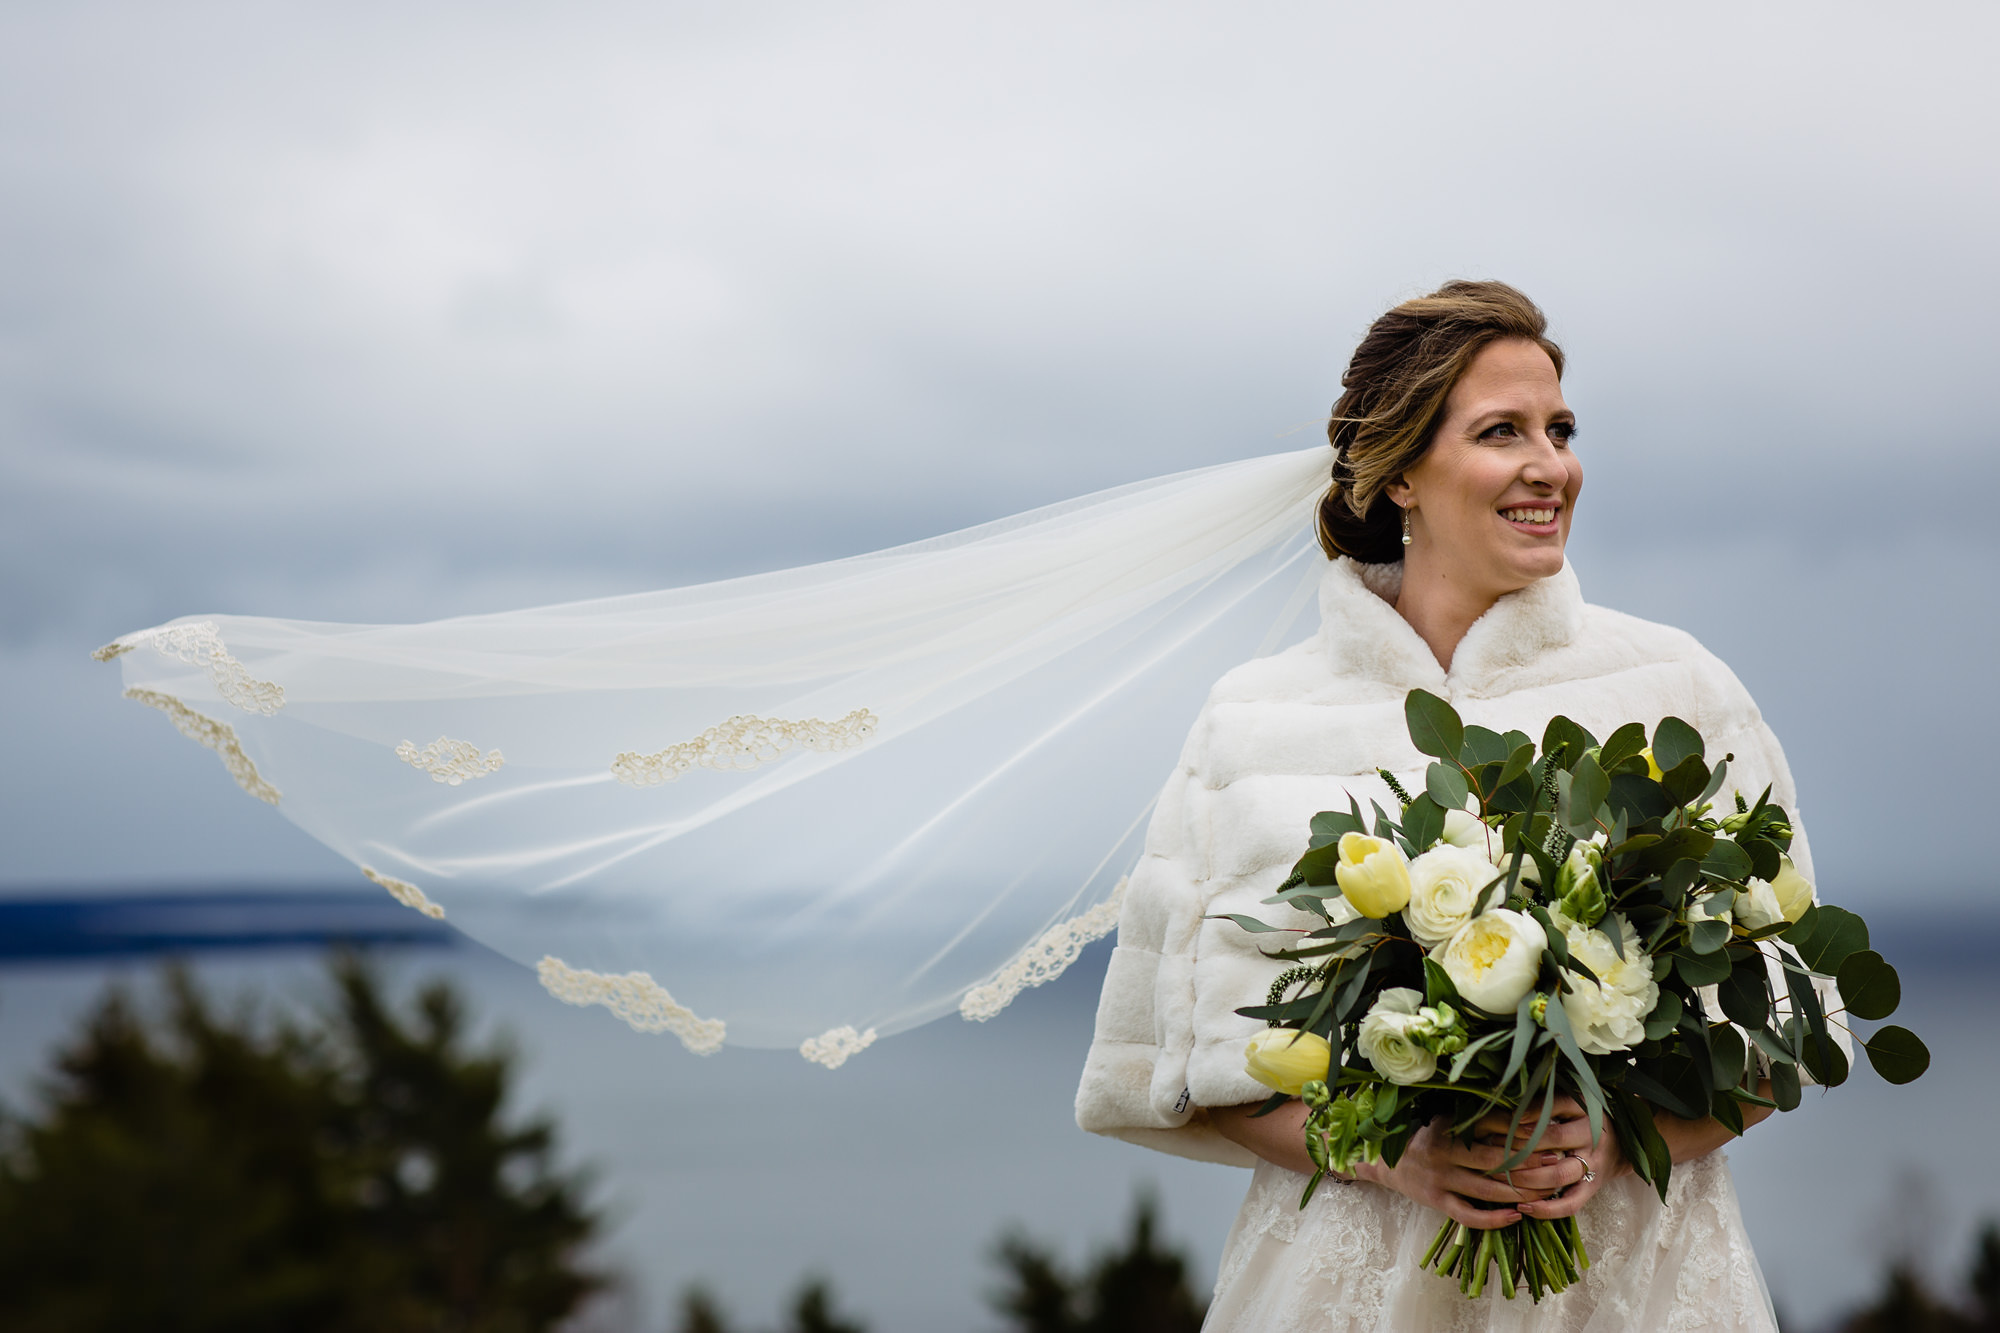 Wedding portraits taken at Point Lookout in Northport, Maine